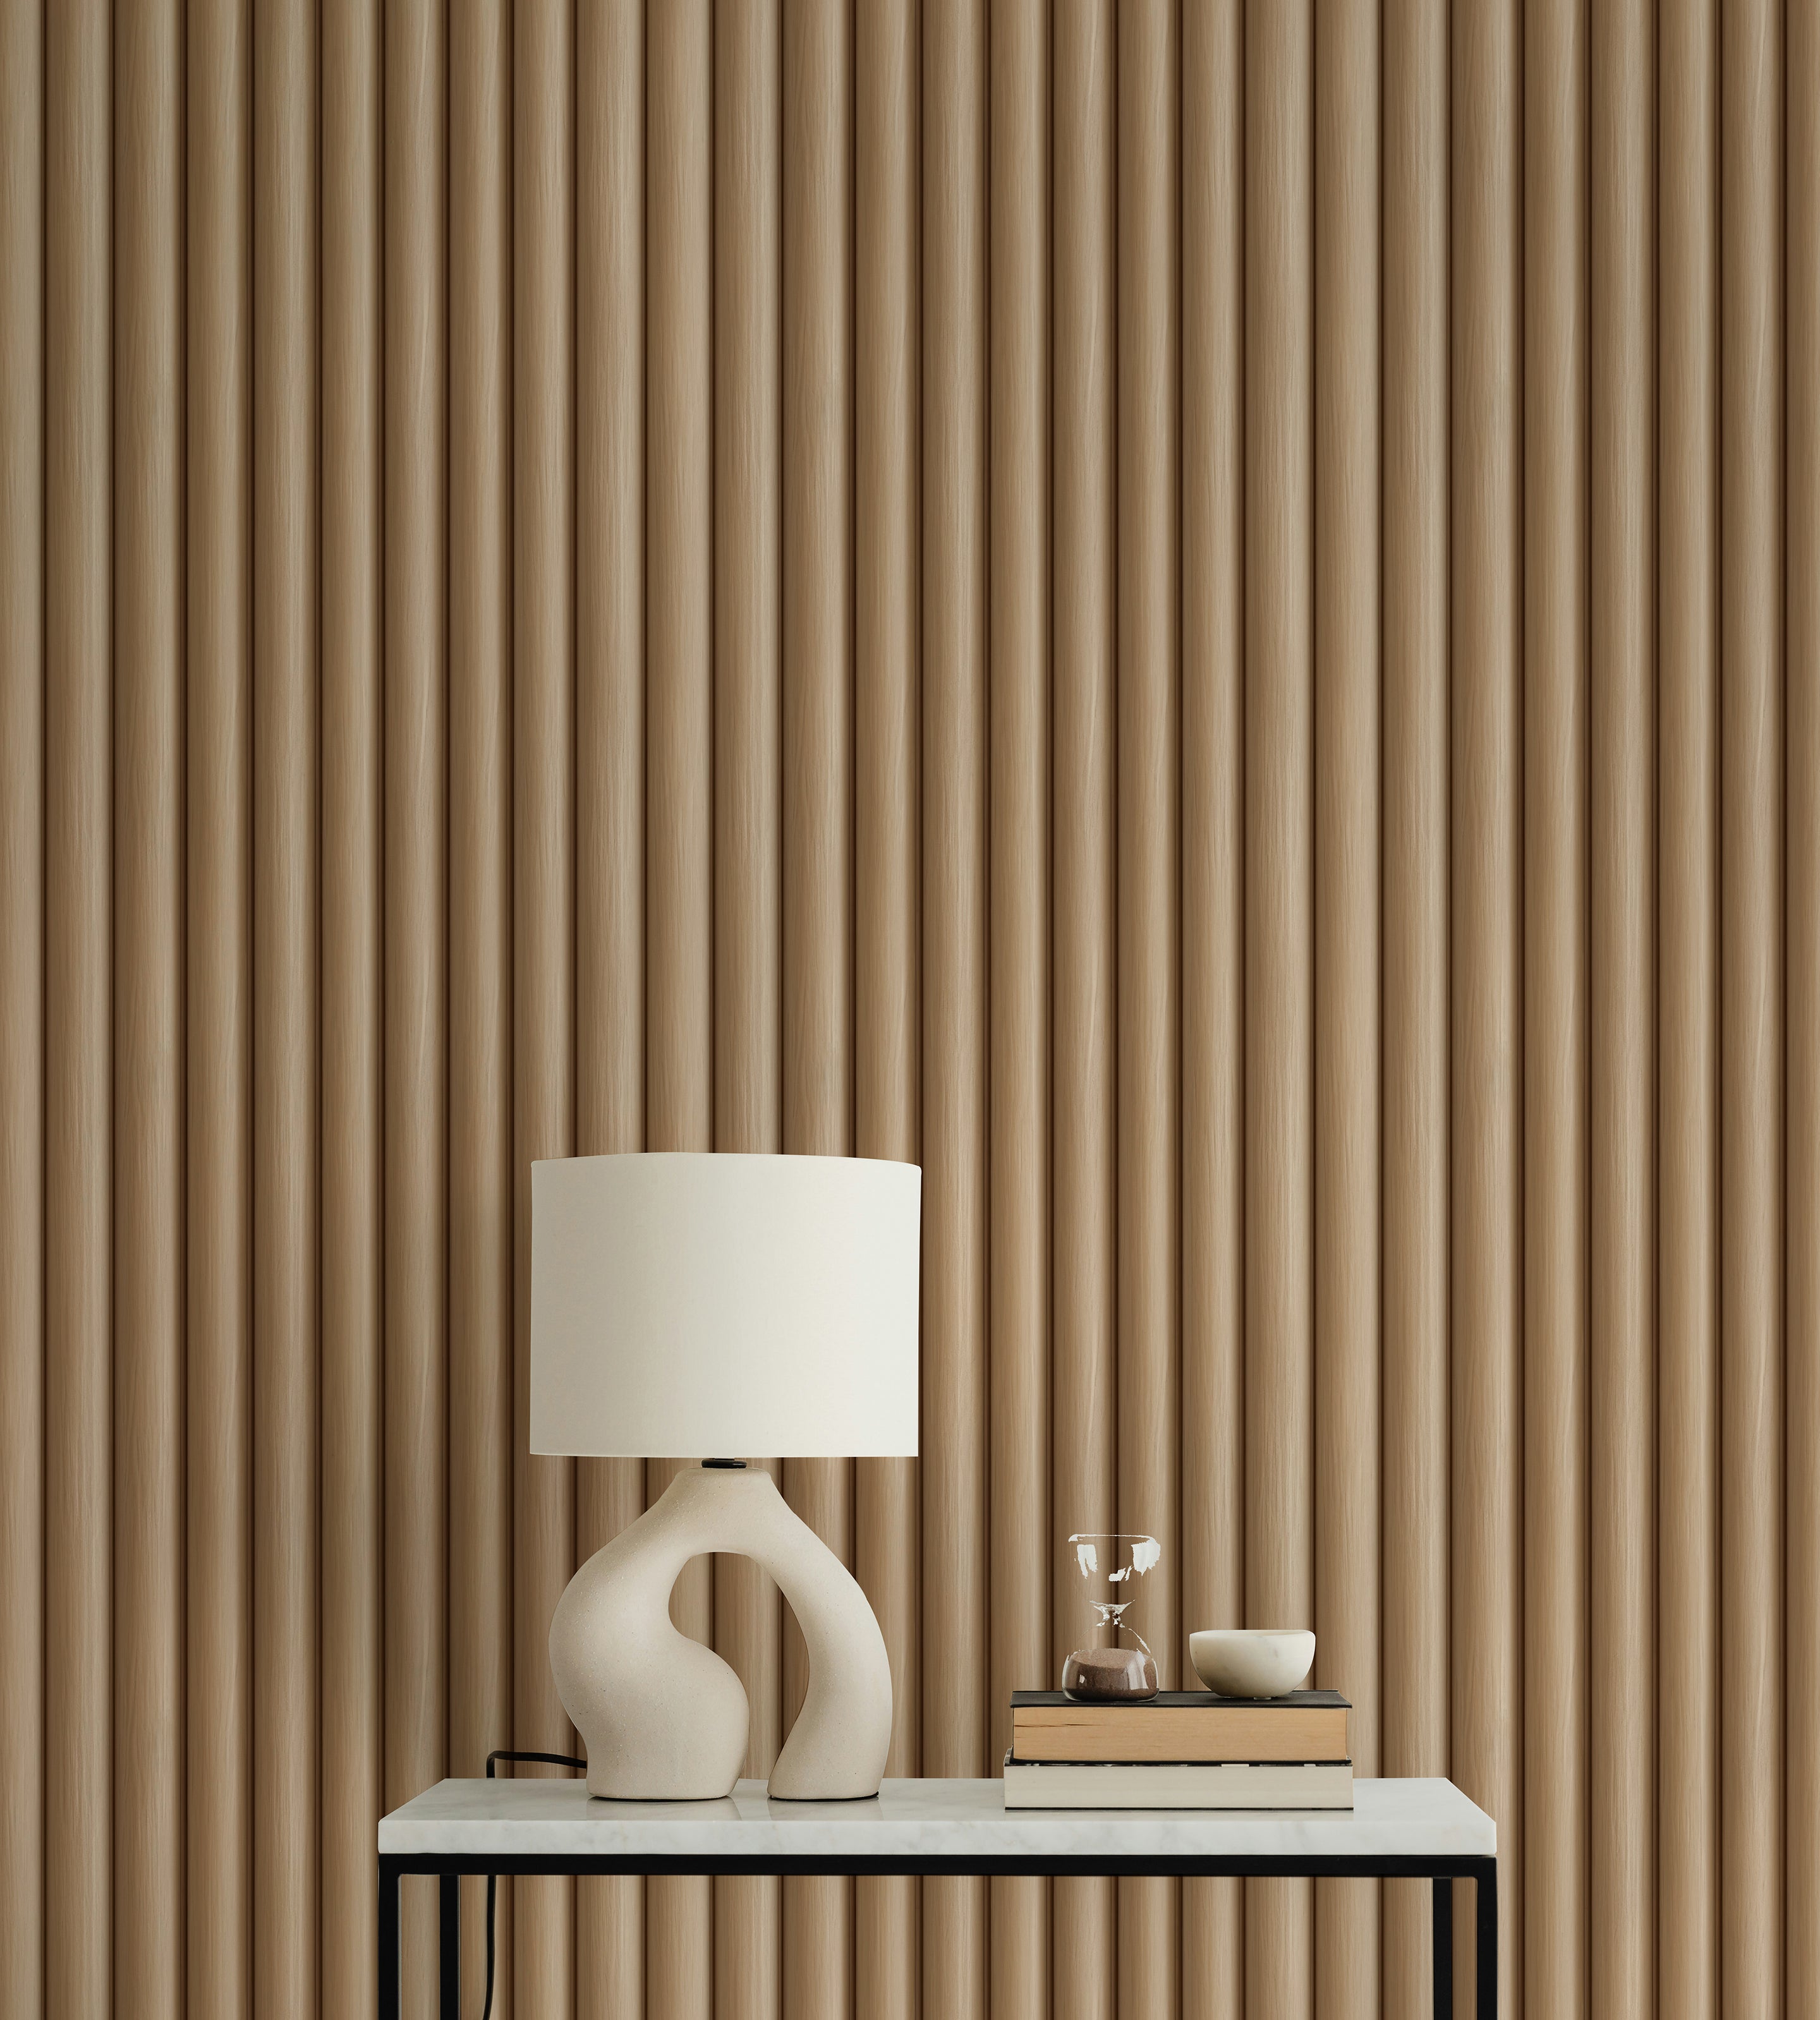 A modern interior featuring Wooden Pillar Wallpaper with vertical grooves in a warm wood tone. The wallpaper adds texture and depth to the space, complemented by a white table lamp with a sculptural base on a sleek black and white console table.